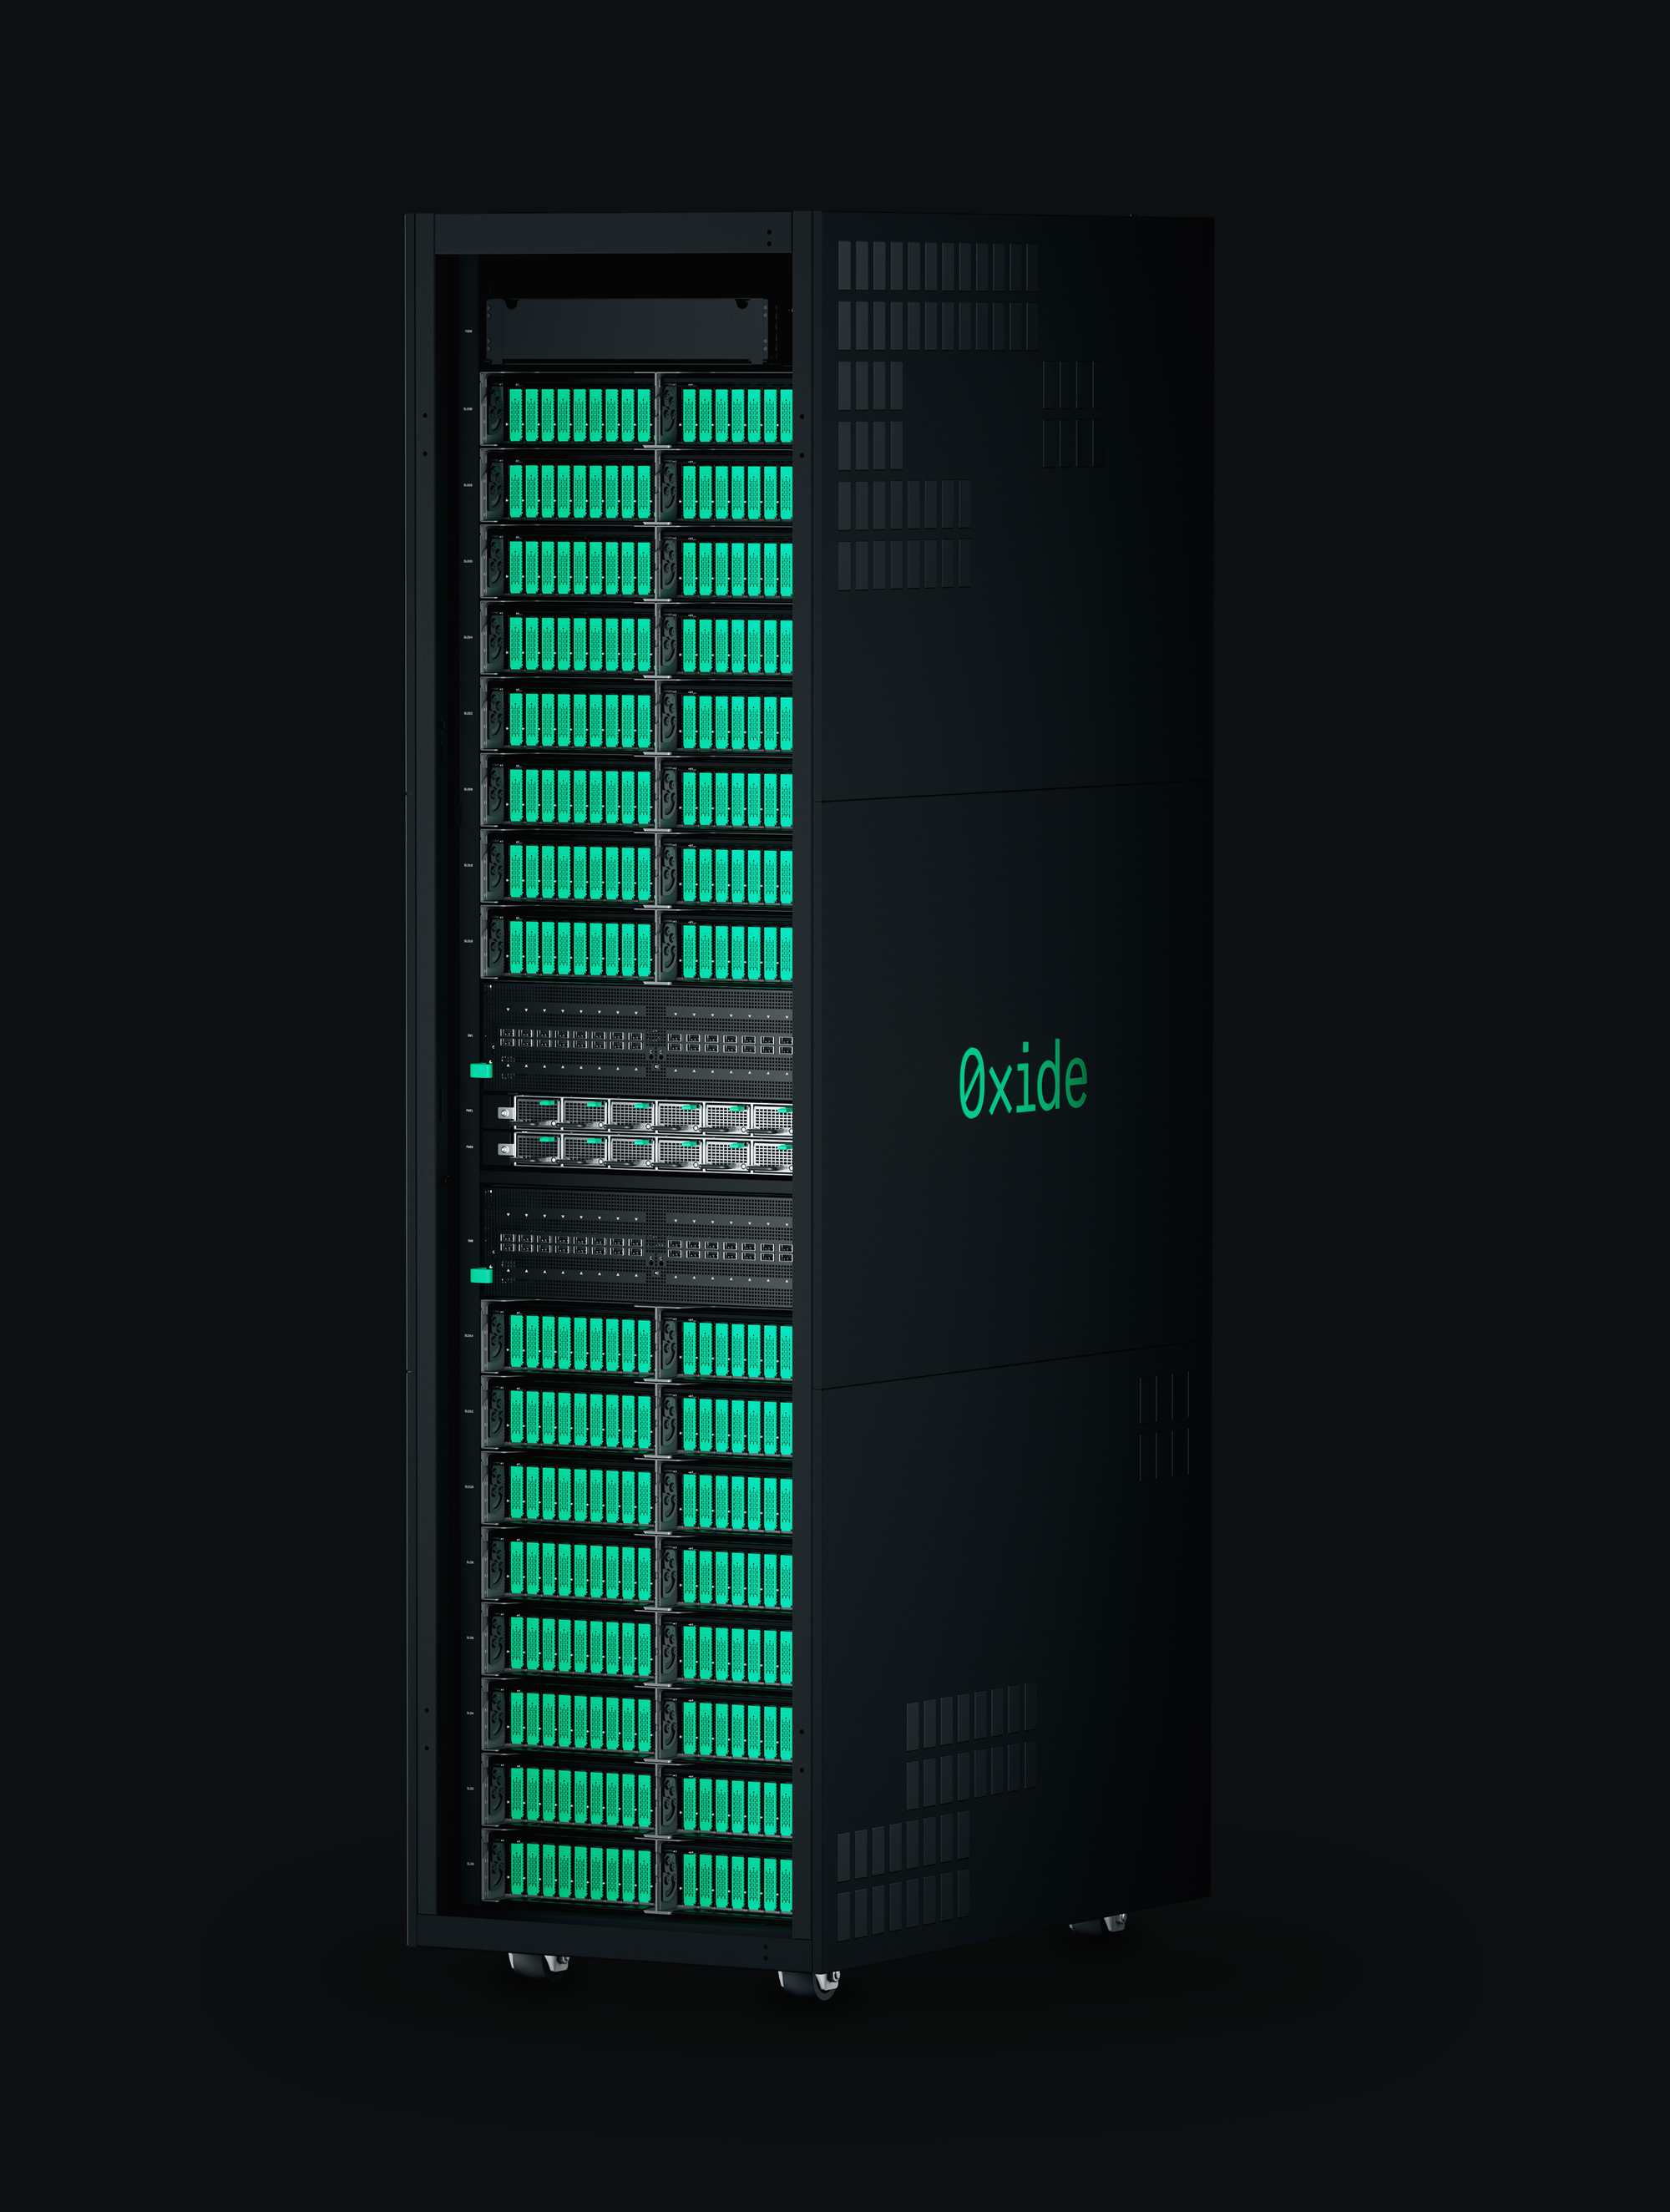 The front view of Oxide's Cloud Computer, a tall black server cabinet filled with green servers called sleds.